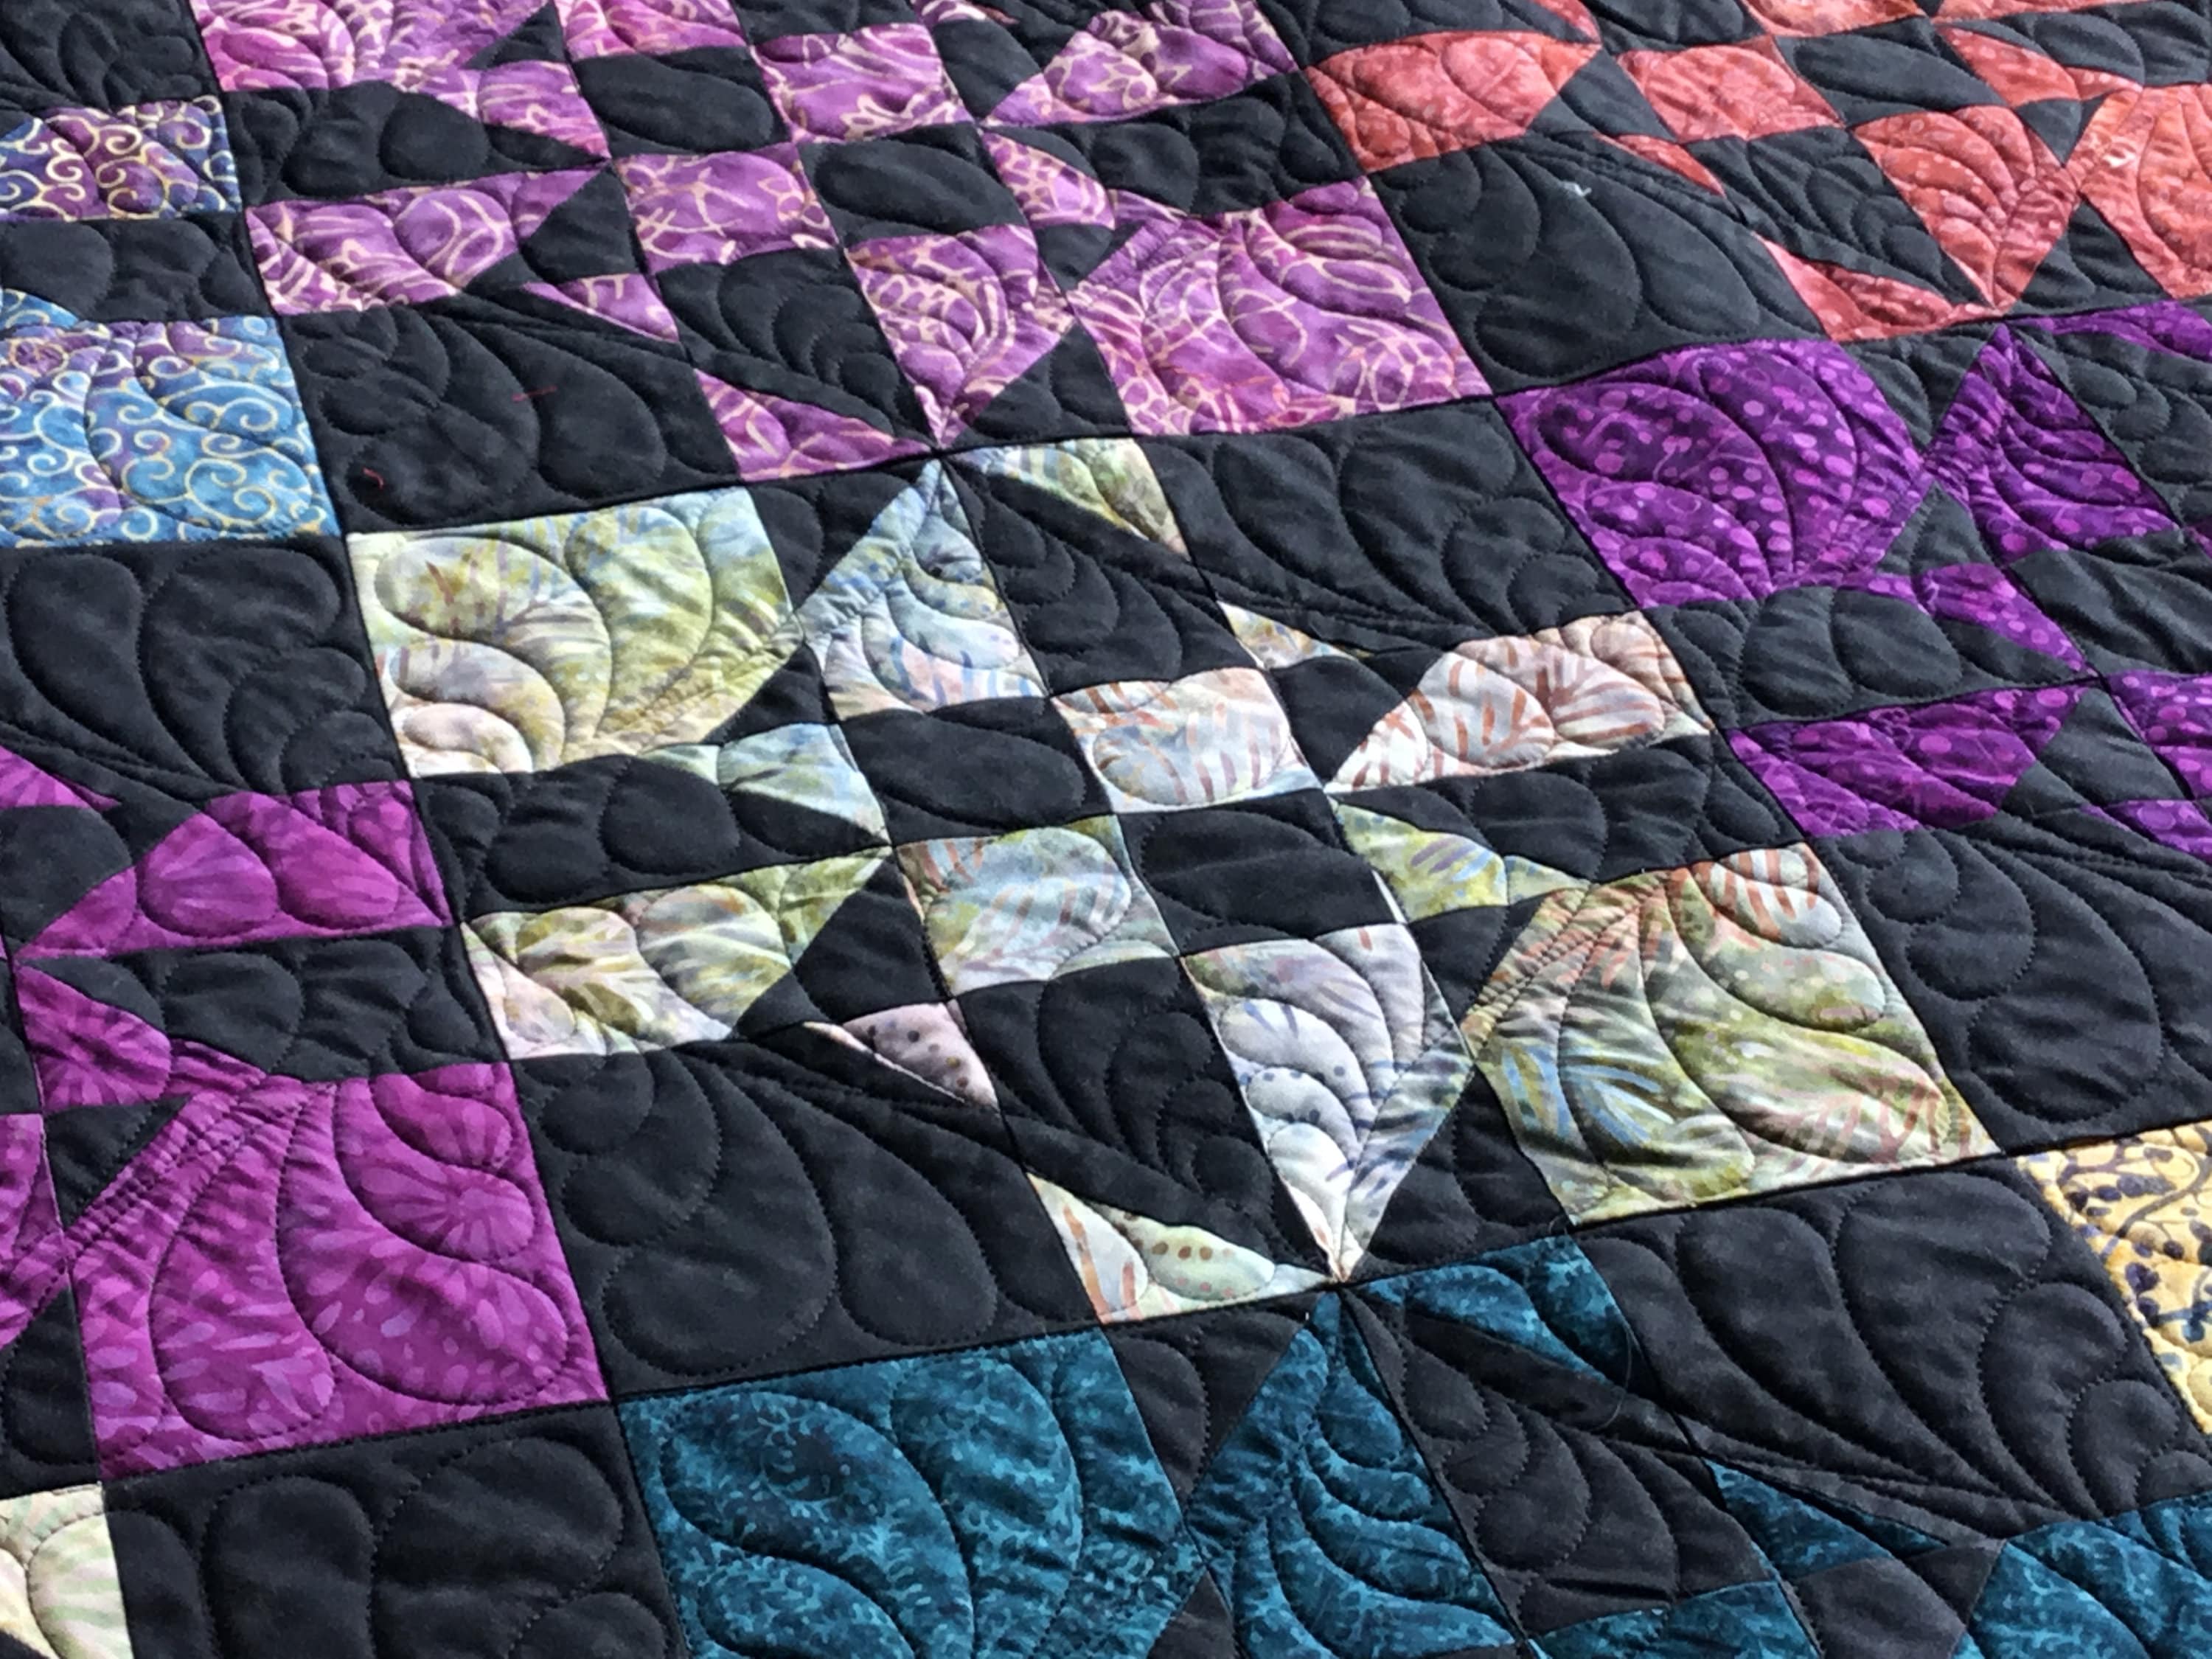 Bold bright geometric quilt
Black and bright colors
quilt for sale handmade homemade patchwork made in USA